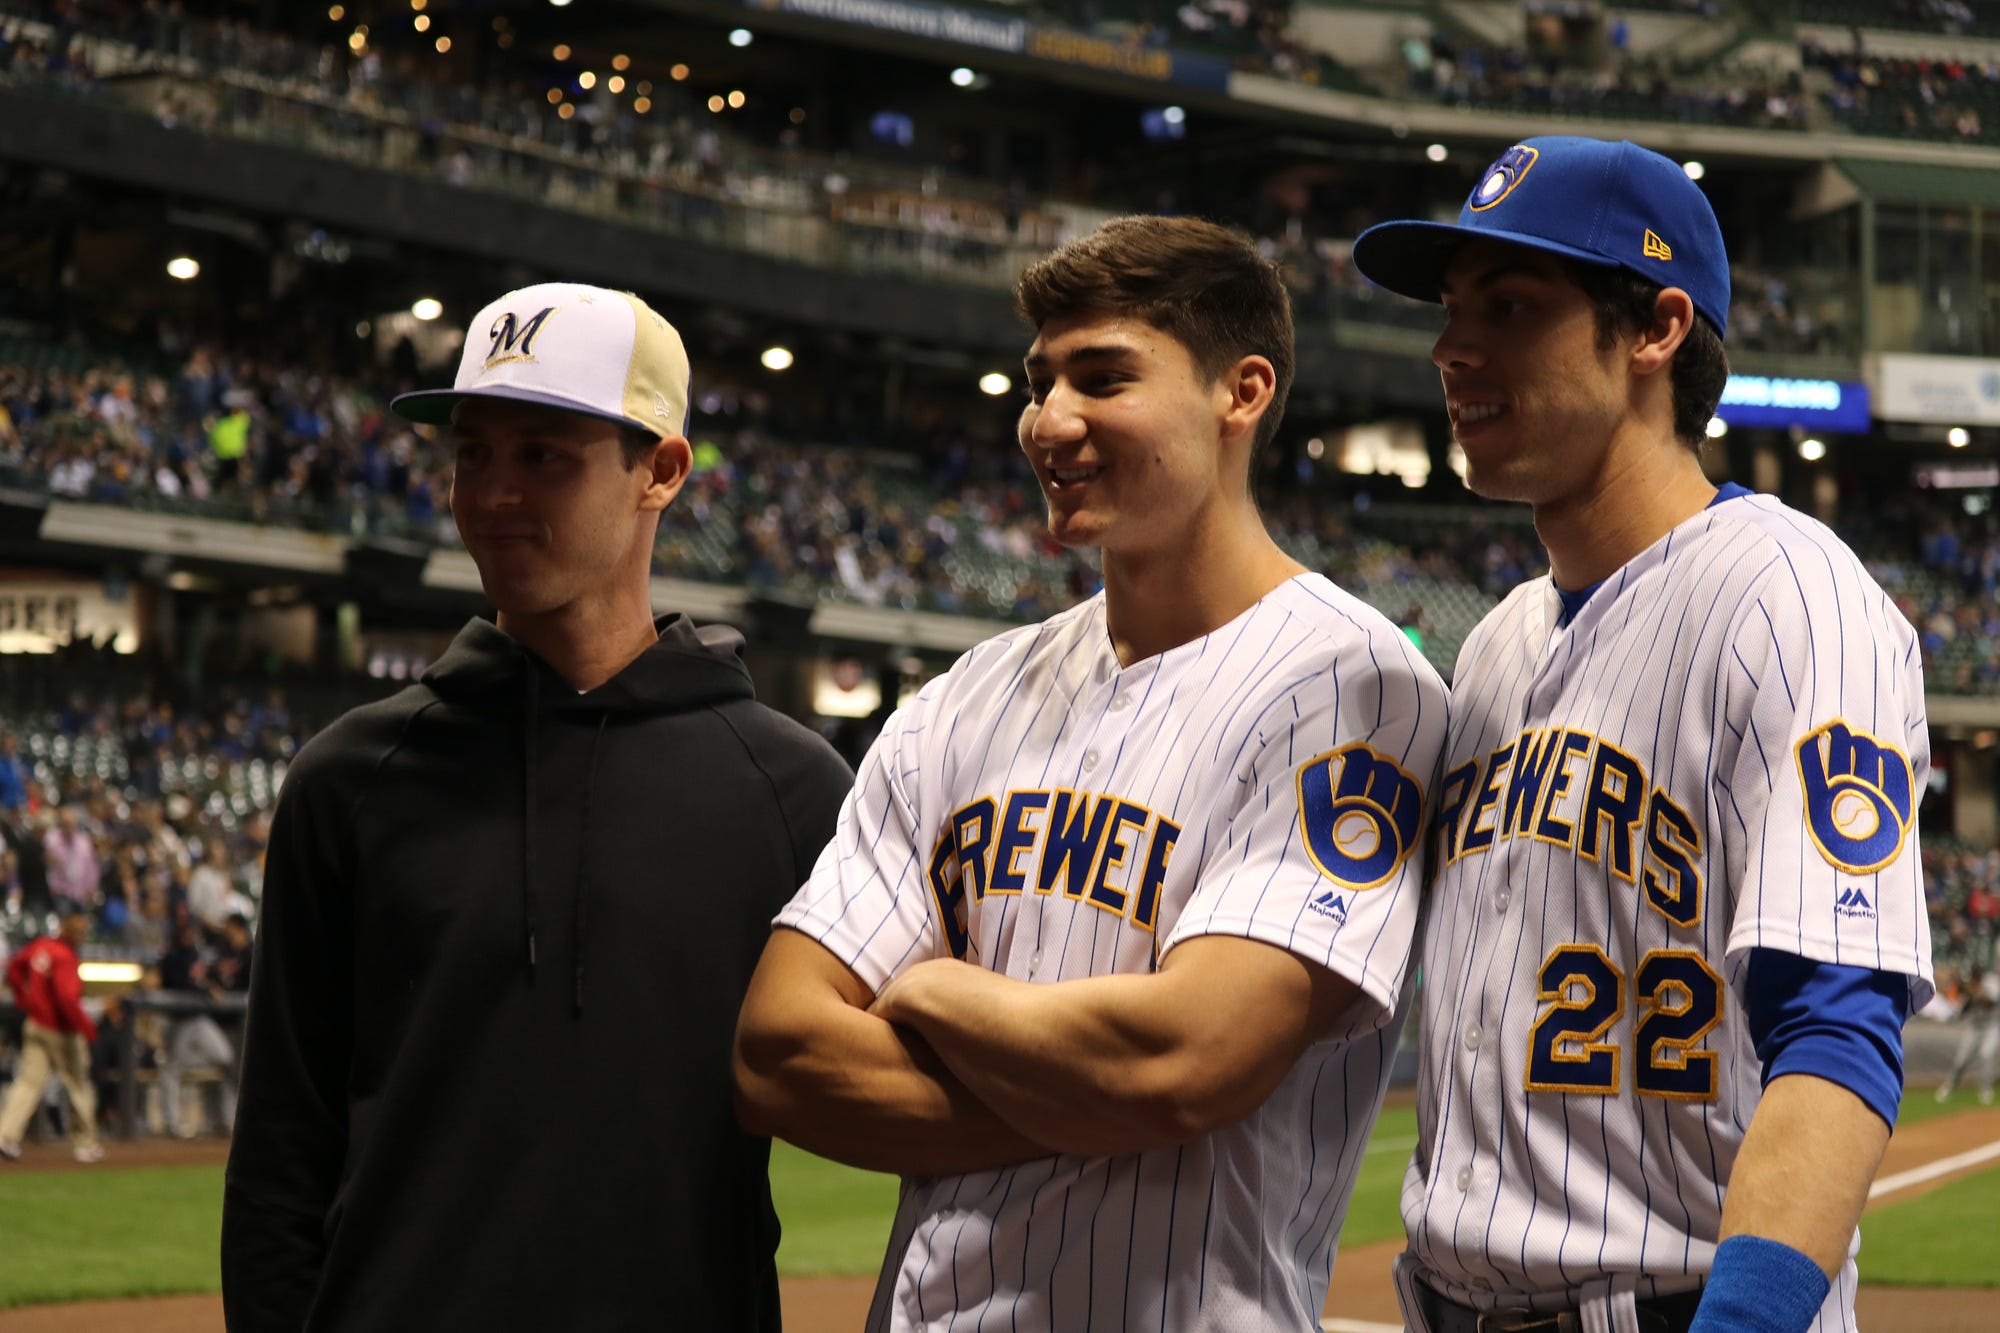 Cameron Yelich Throws Ceremonial First Pitch